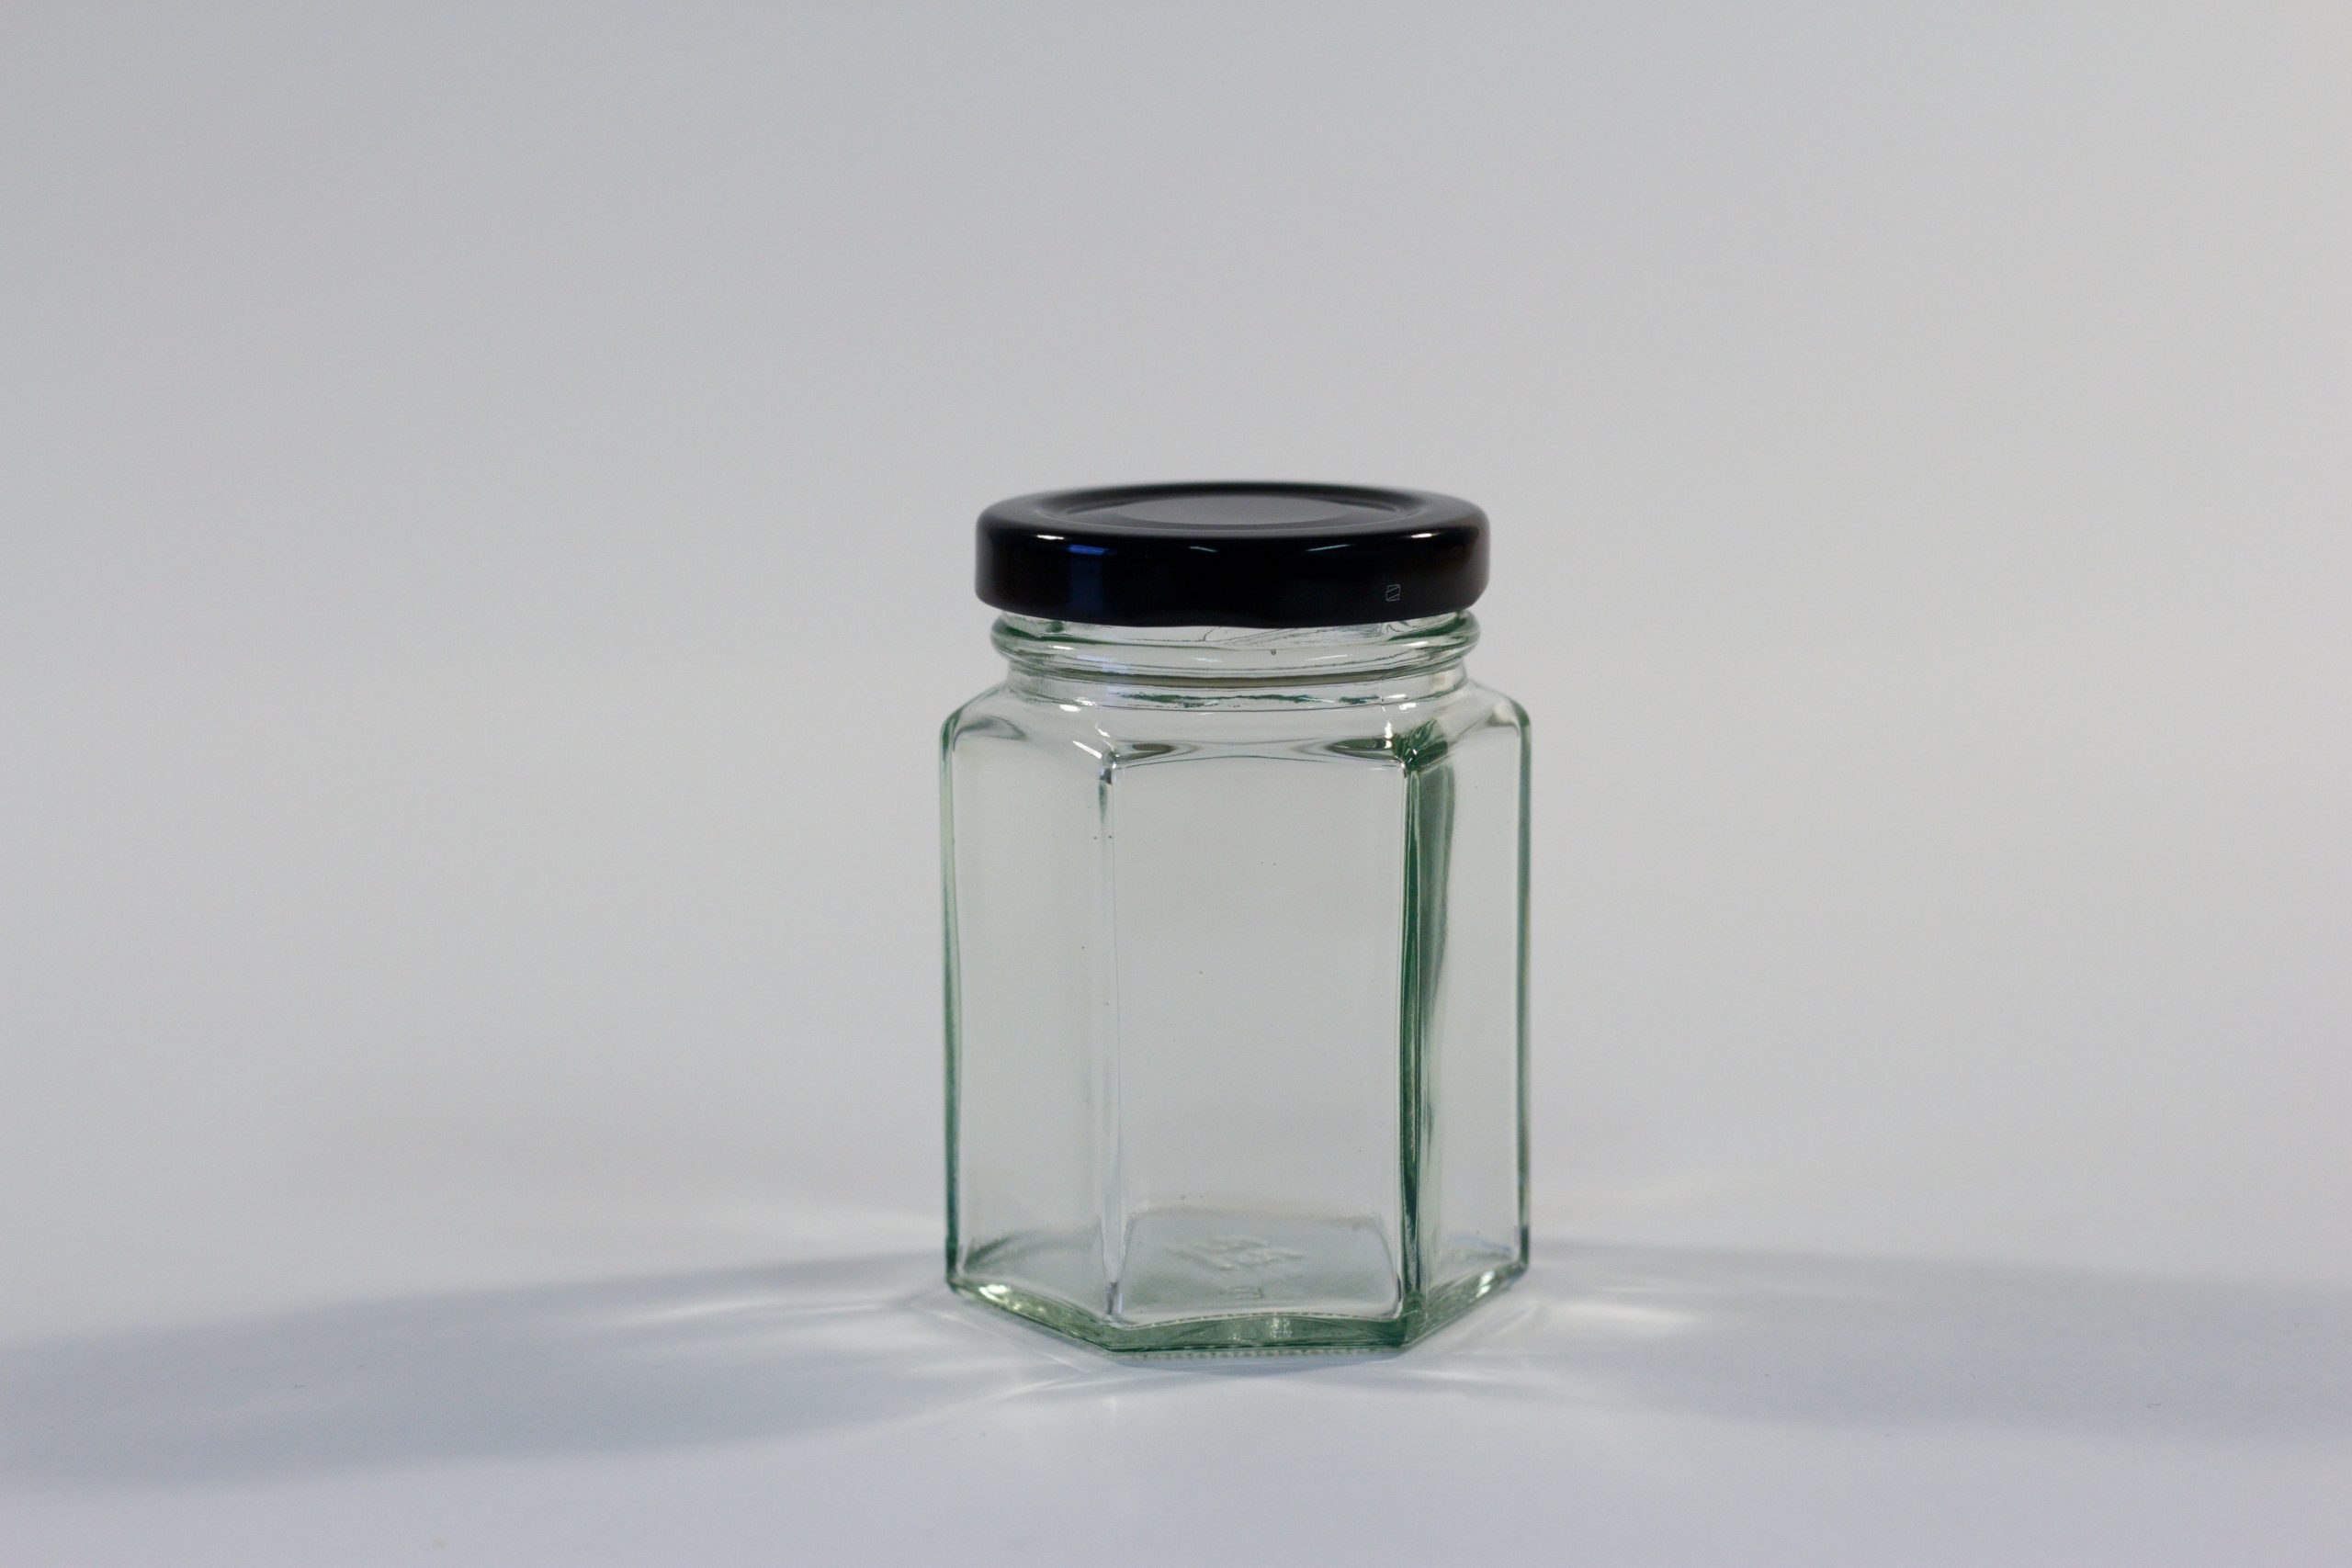 110ml Hexagonal glass jar with lid. Food grade packaging perfect for honey, jams, confectionarys and chutneys